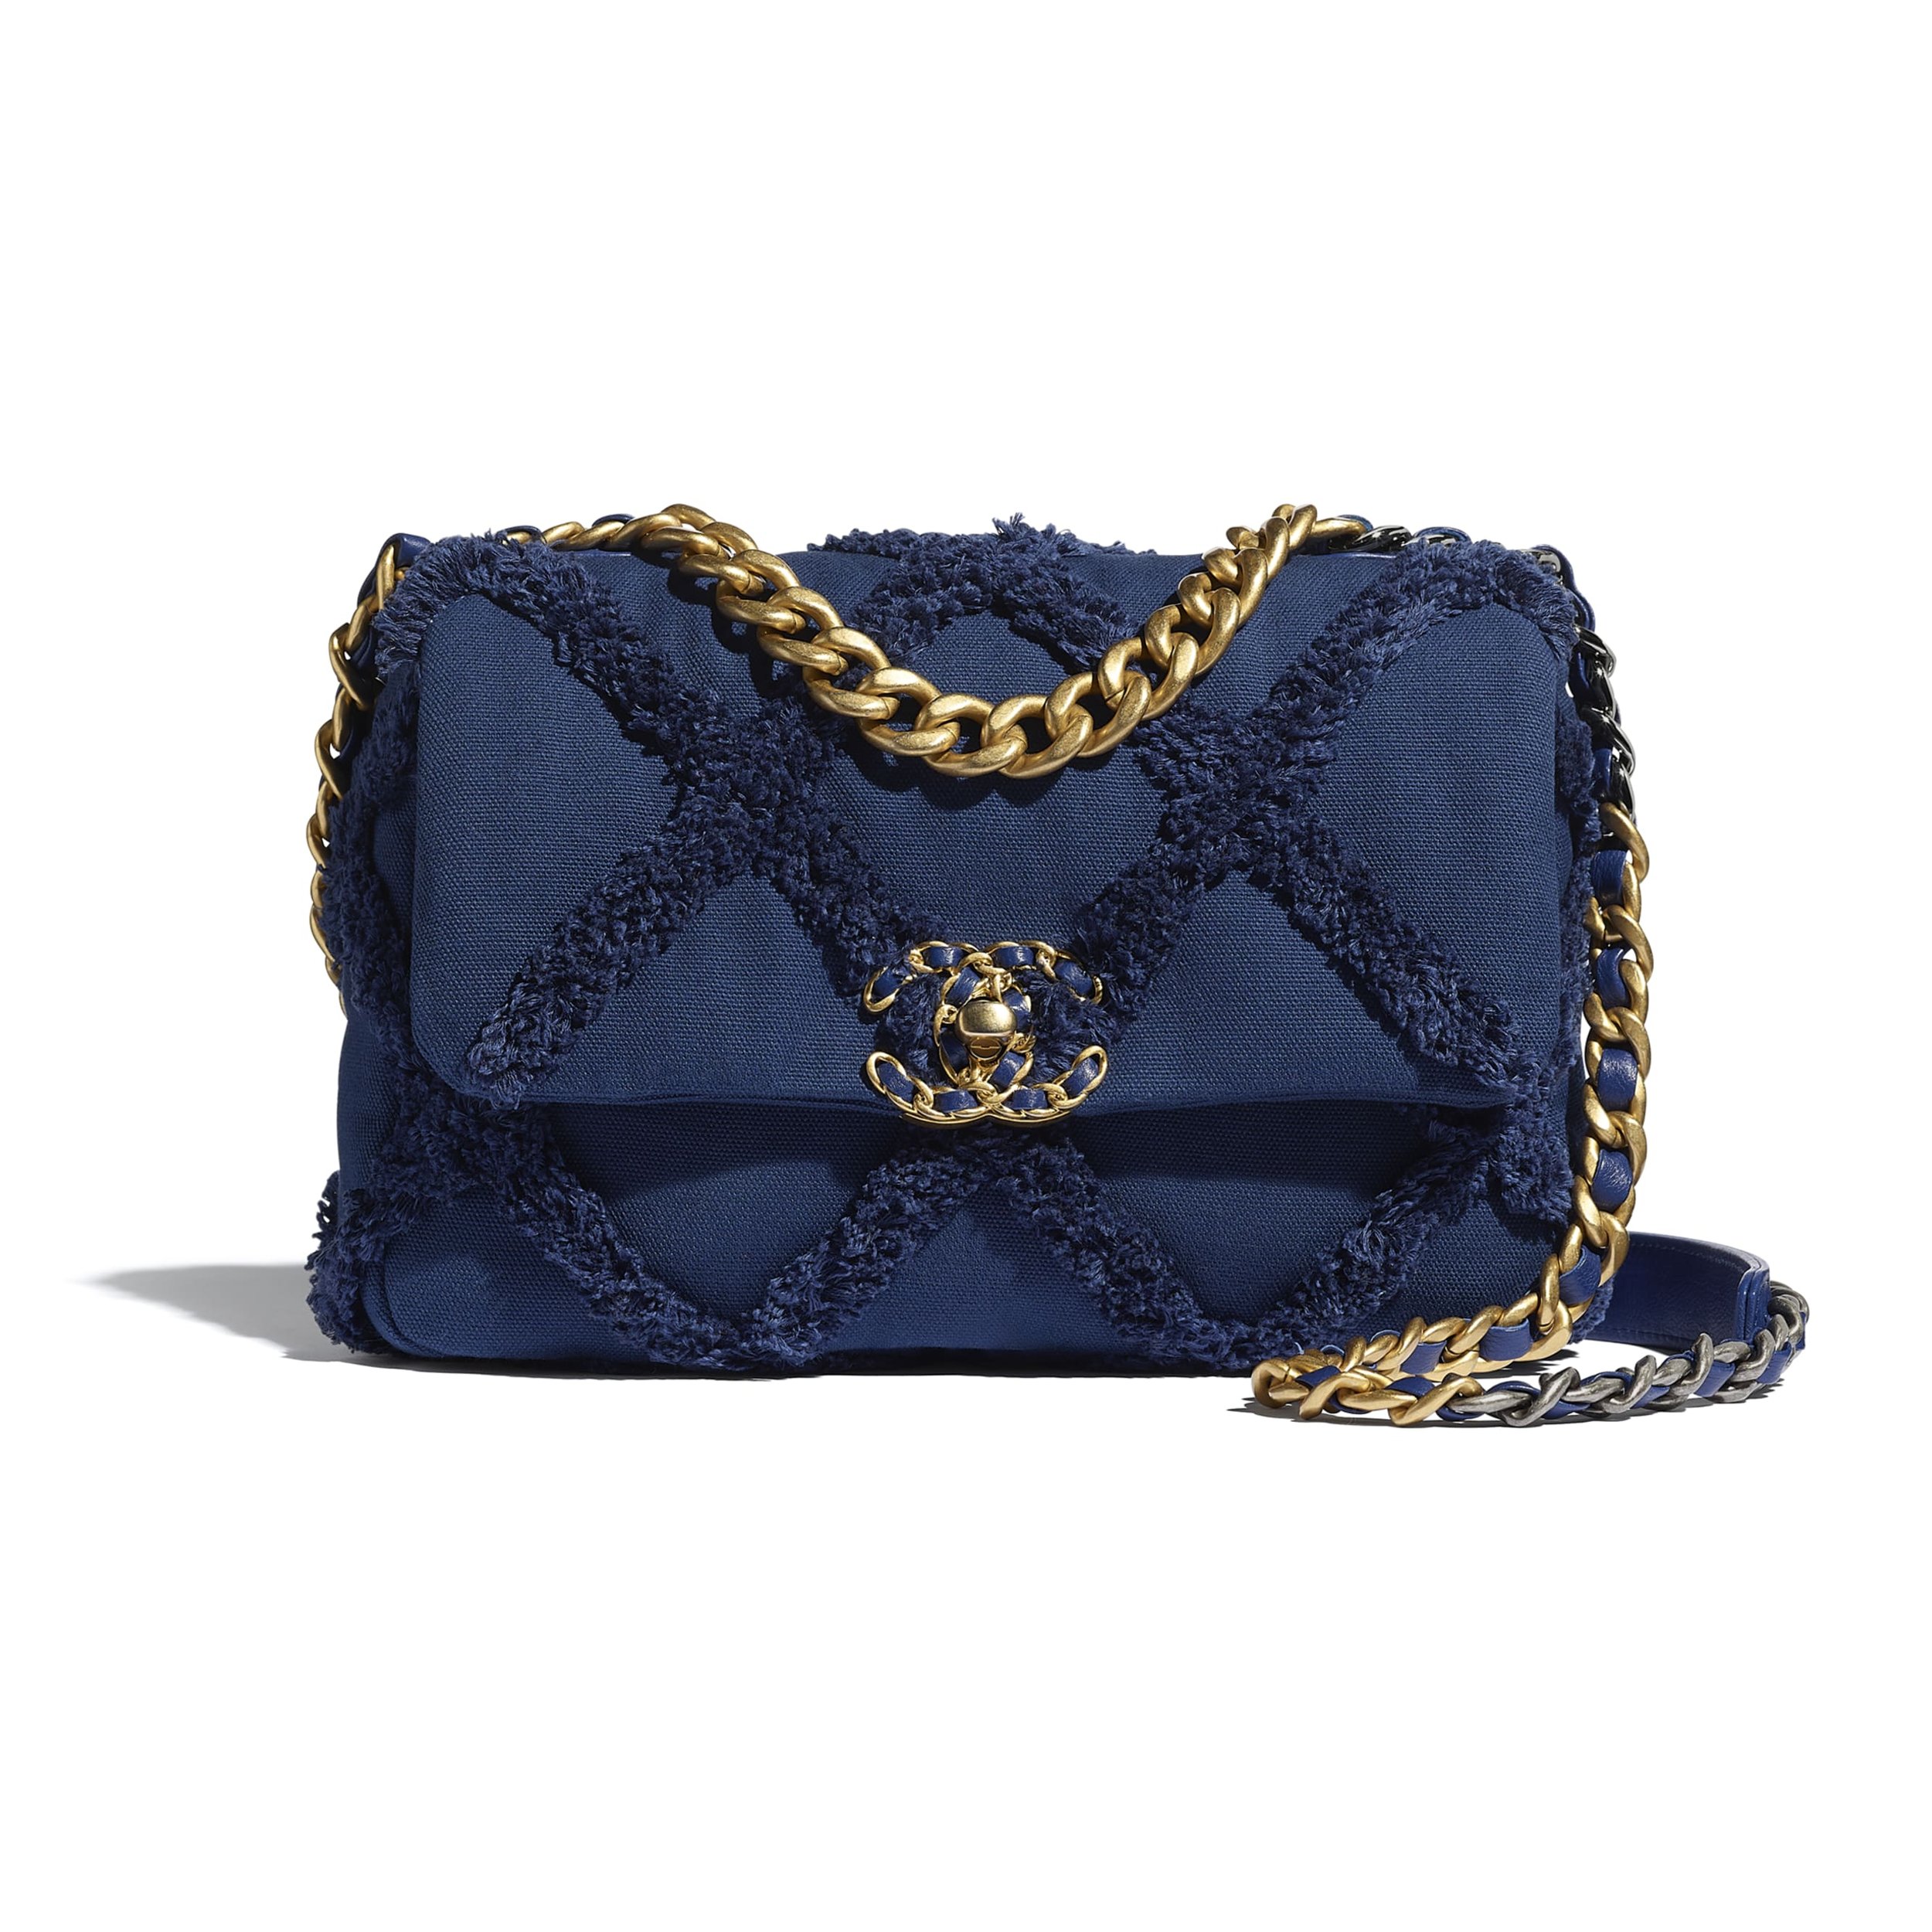 Chanel Large 19 Handbag in Navy Blue Cotton Canvas Calfskin with Gold Tone, Silver Tone & Ruthenium Finish.jpg